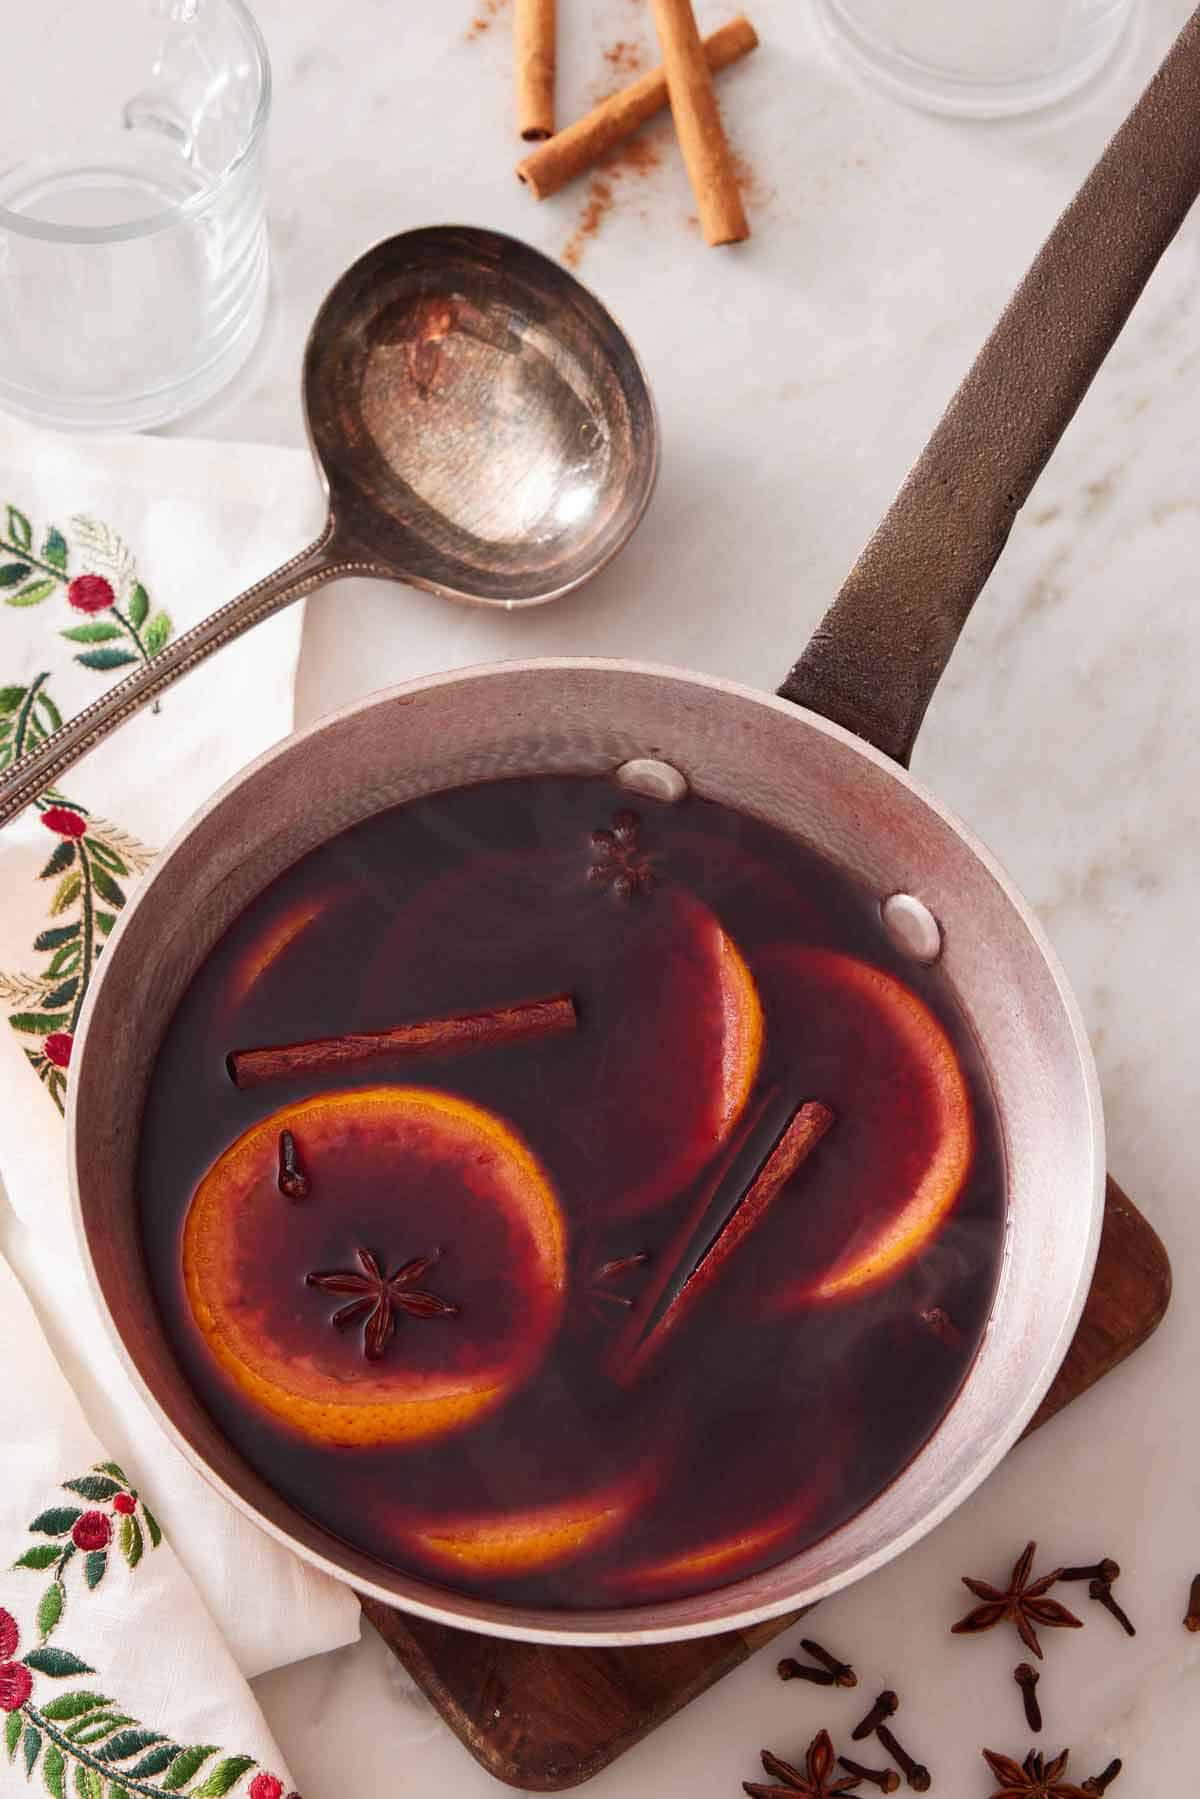 Overhead view of a skillet of mulled wine with a ladle off to the side. Scattered star anise around with cinnamon sticks.